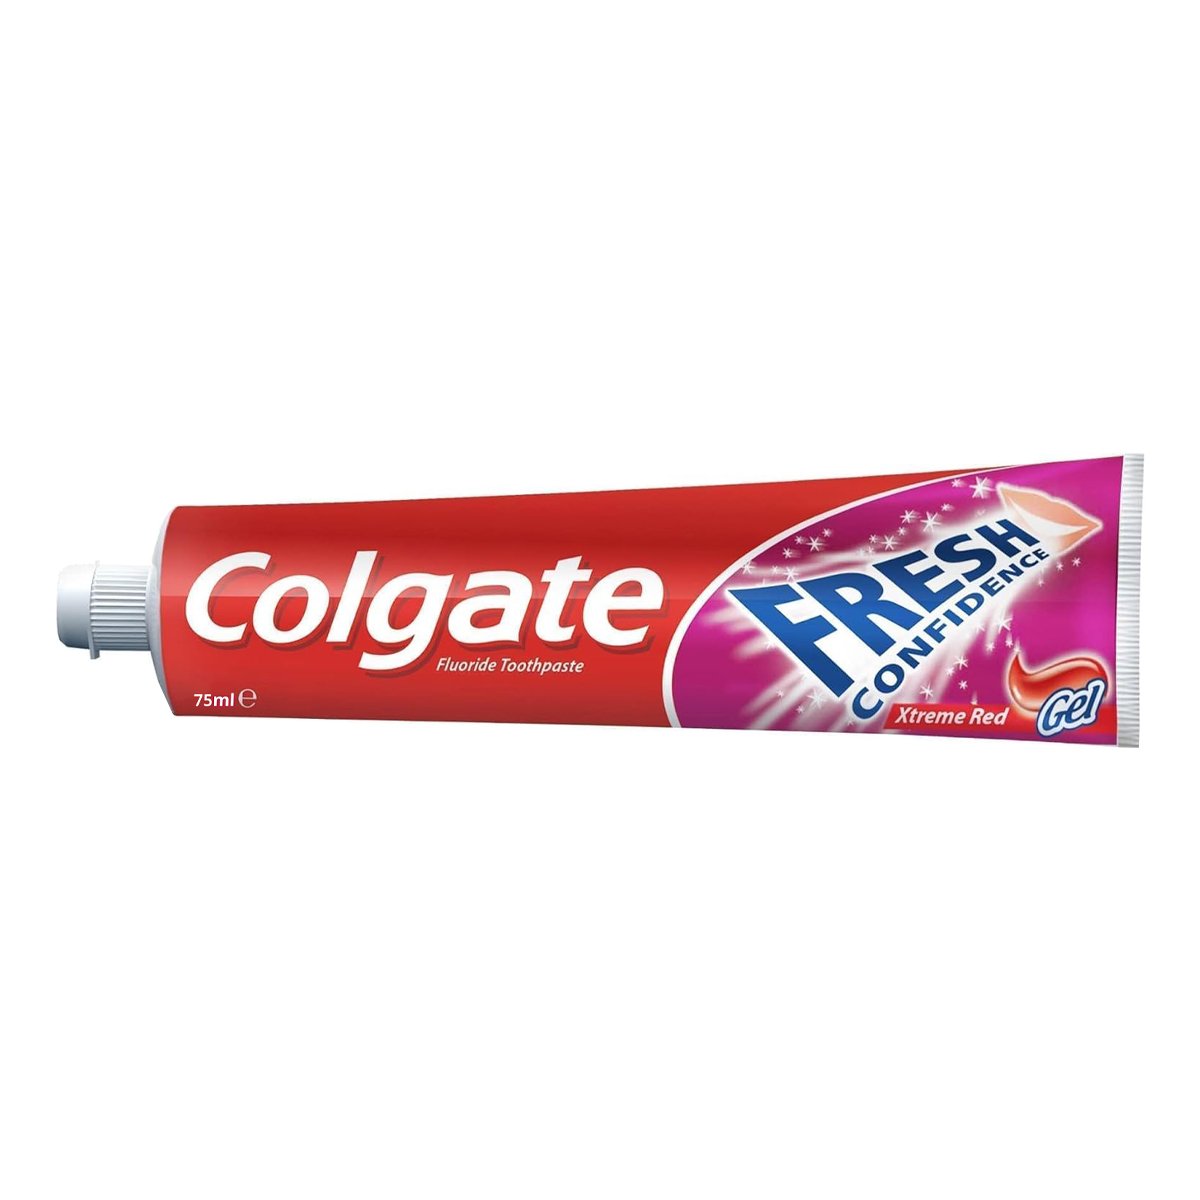 Colgate Fresh Confidence Xtreme Red Toothpaste Value Pack 4 x 75 ml